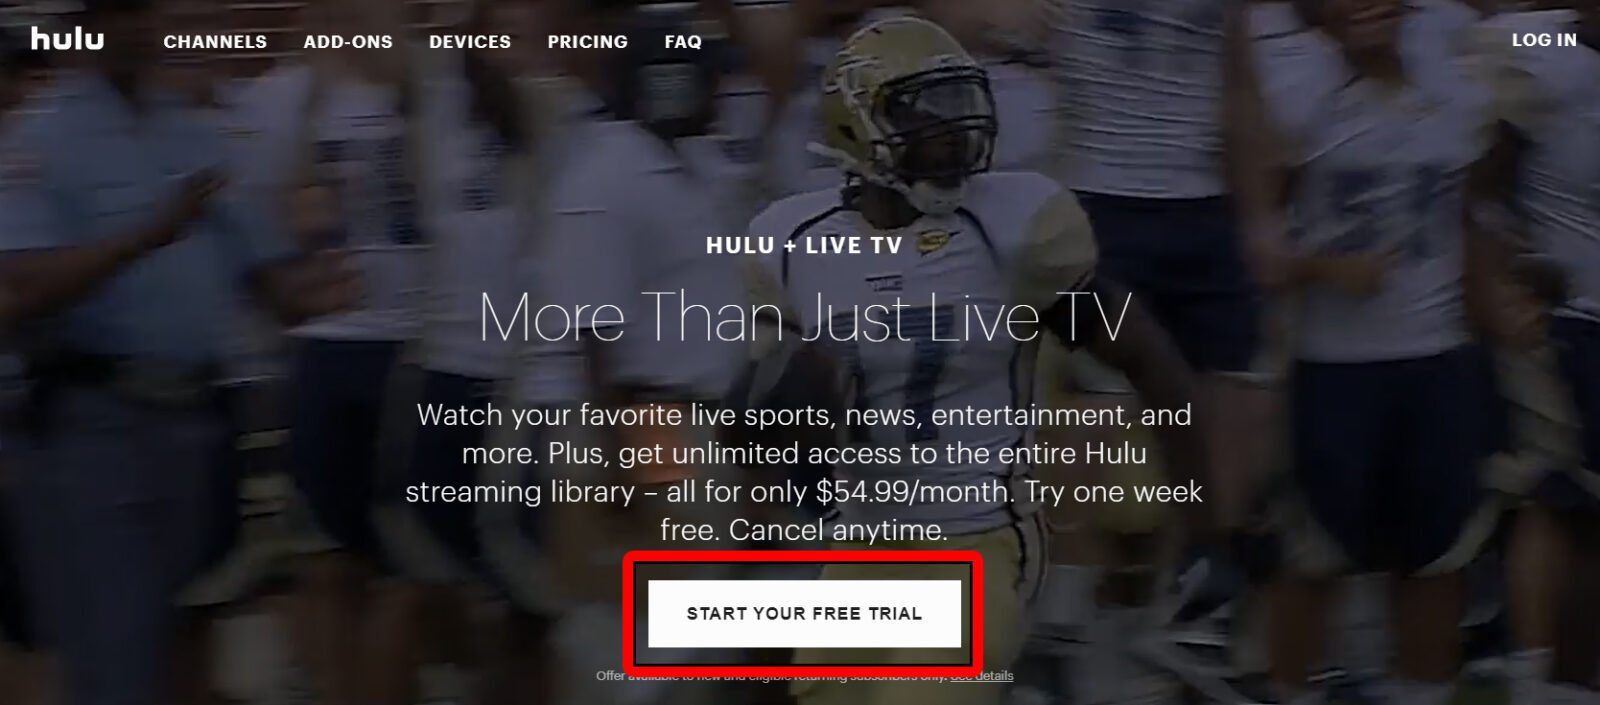 How to Watch Live TV on Hulu